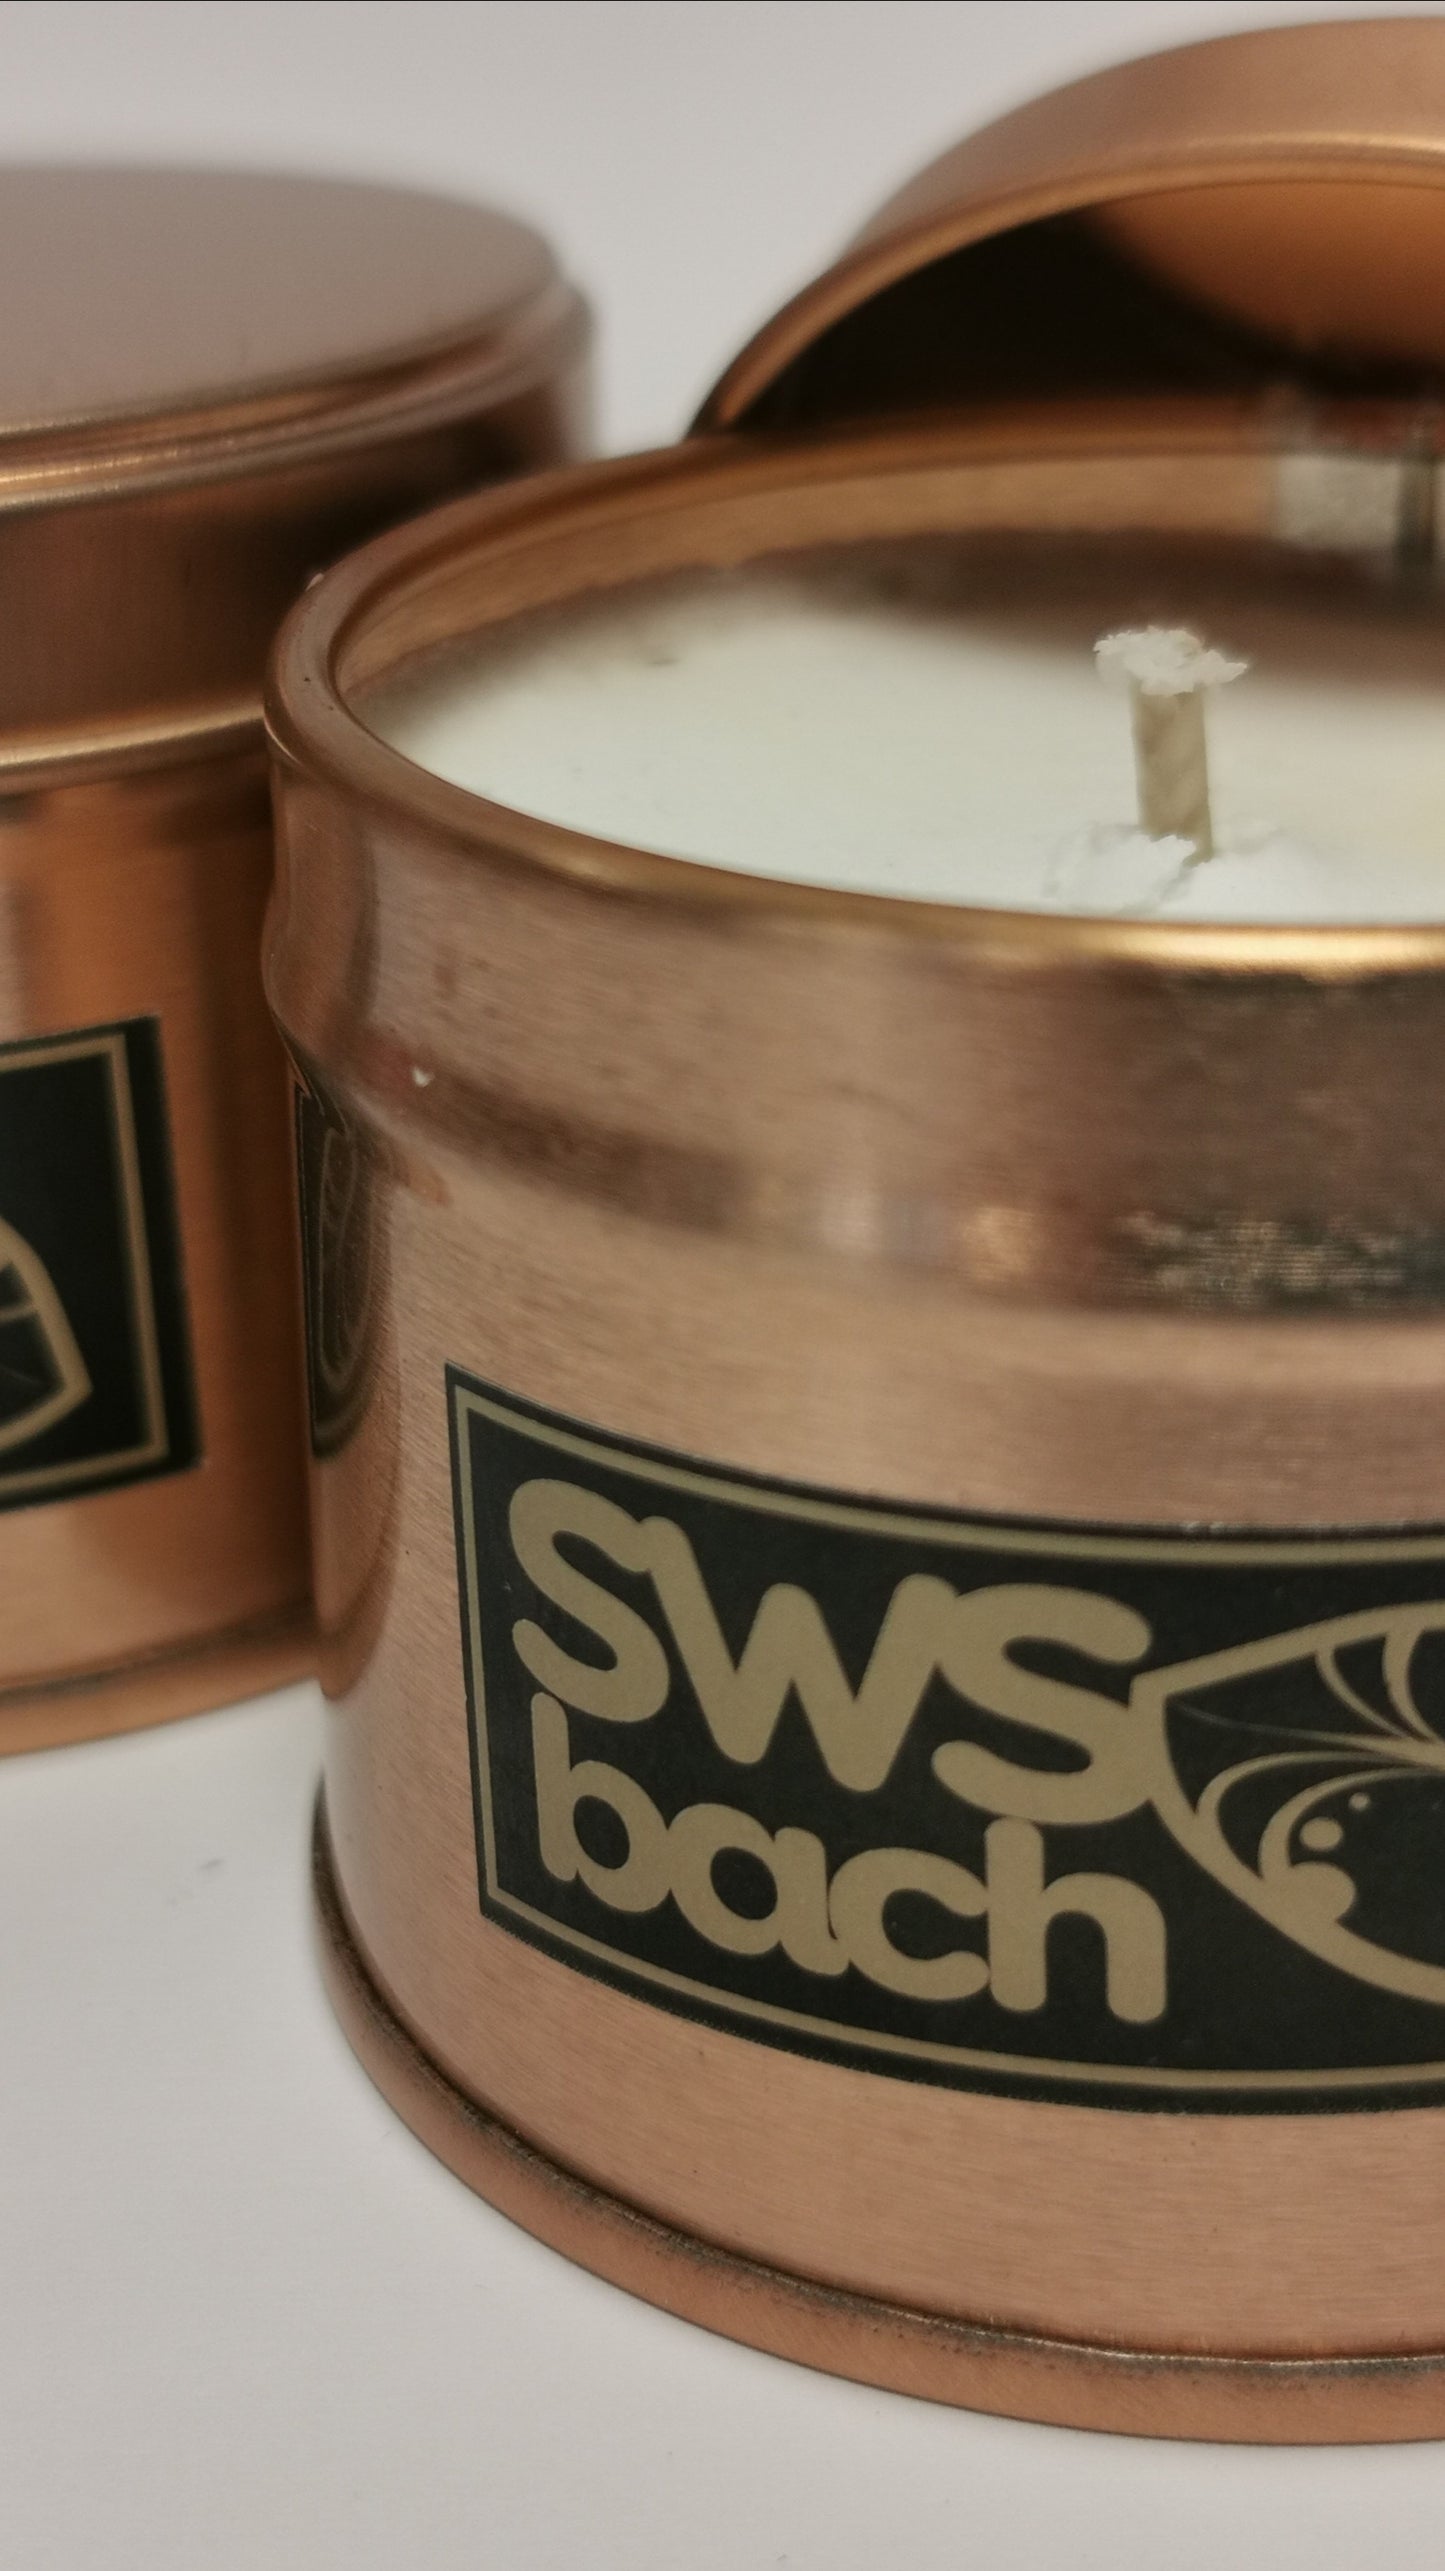 Luxury Candles Handmade in Wales